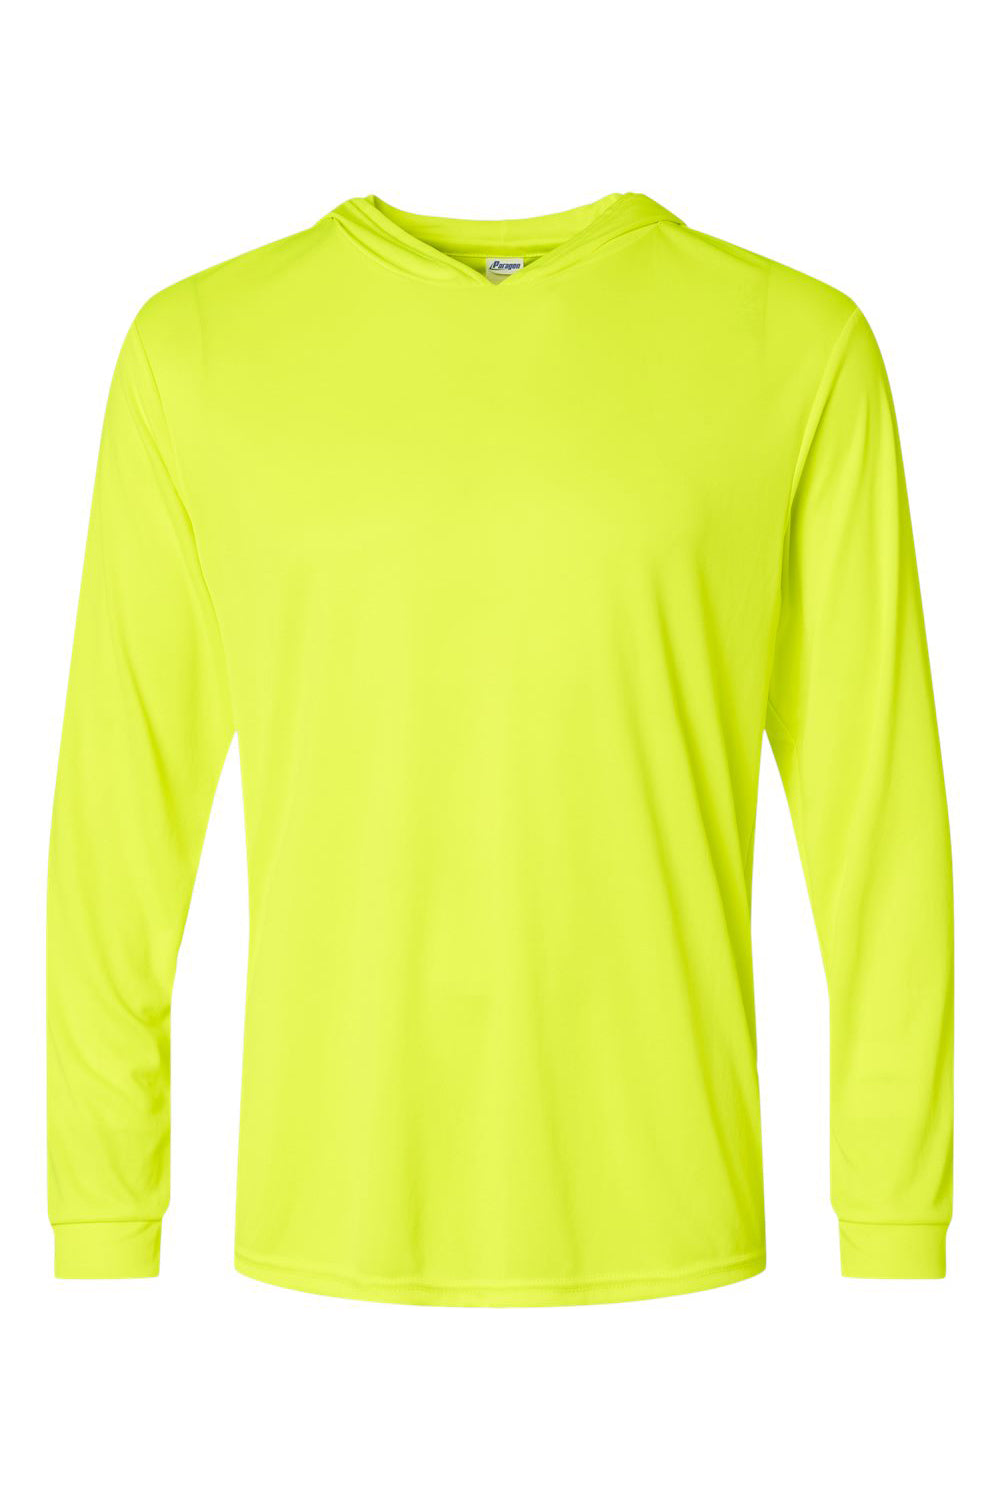 Paragon 220 Mens Bahama Performance Long Sleeve Hooded T-Shirt Hoodie Safety Green Flat Front